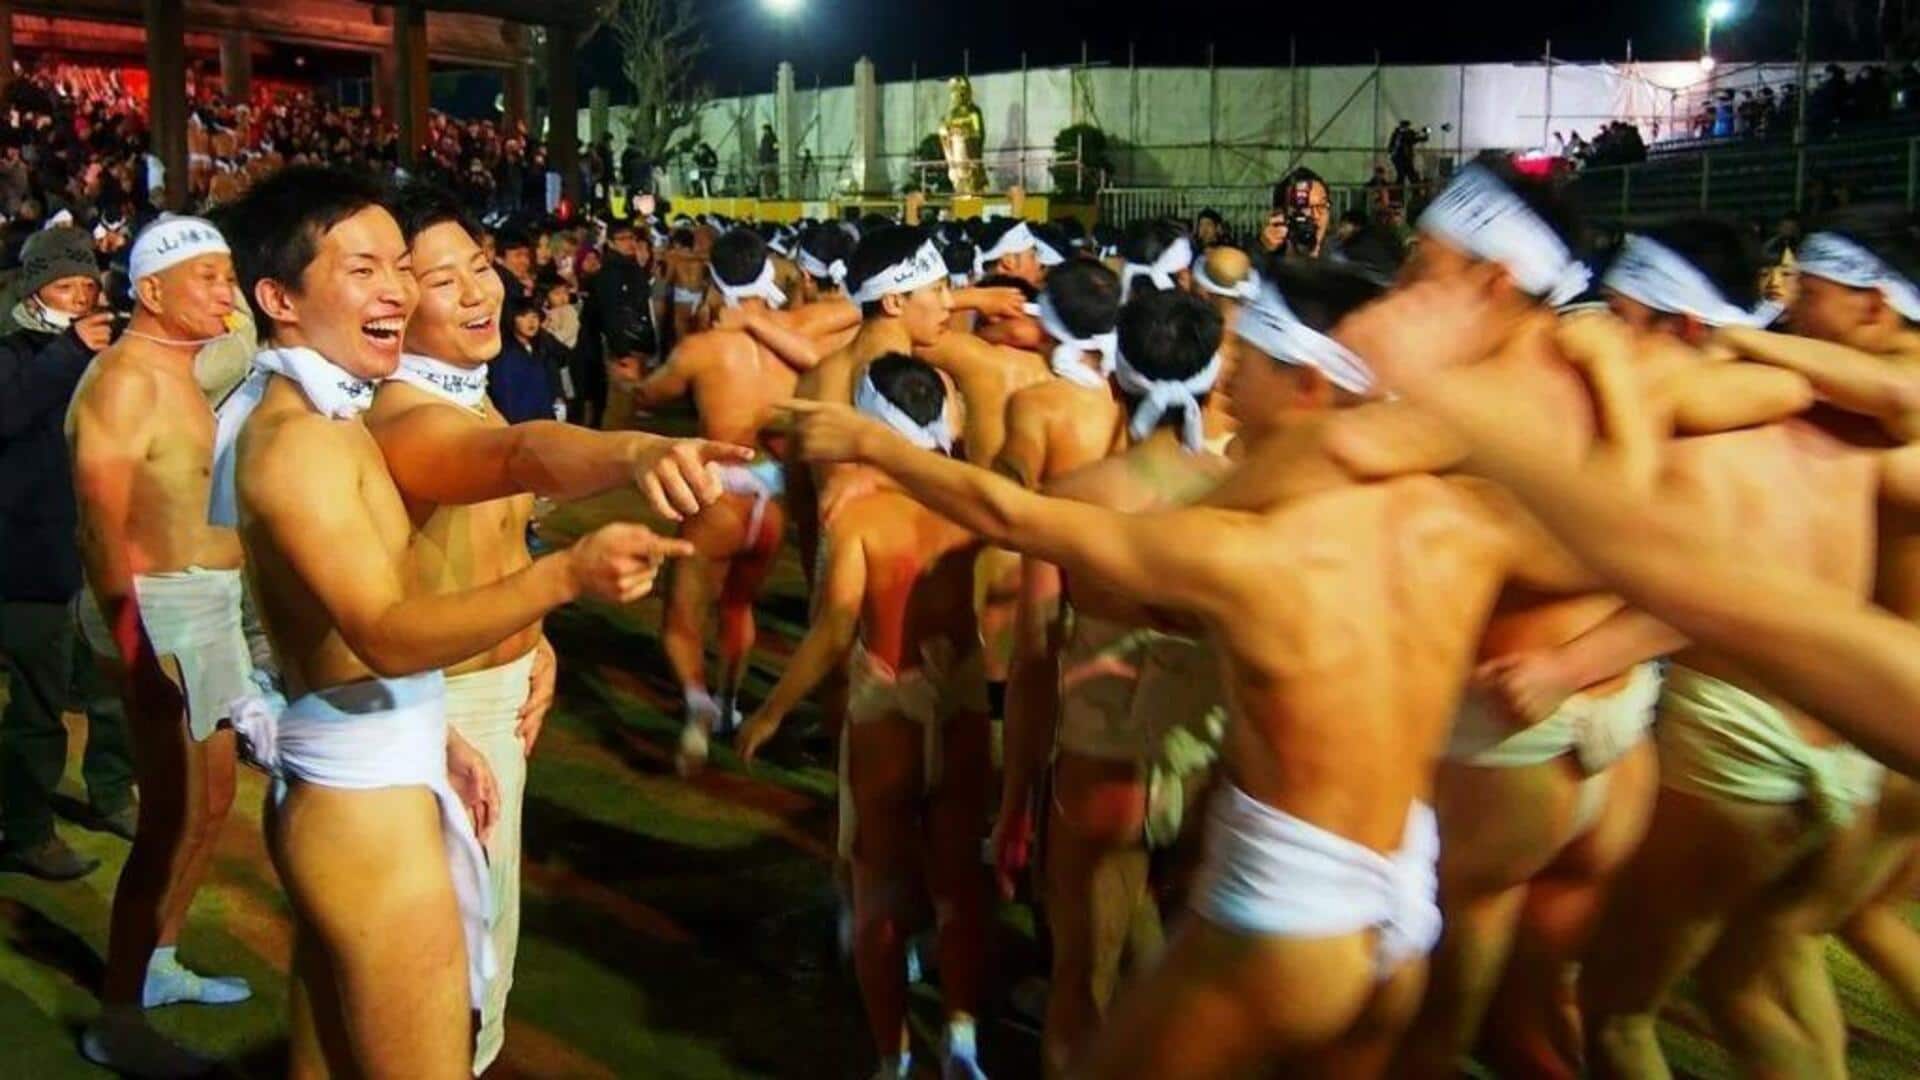 1,000-year-old Japanese 'Naked Festival' ends due to aging population